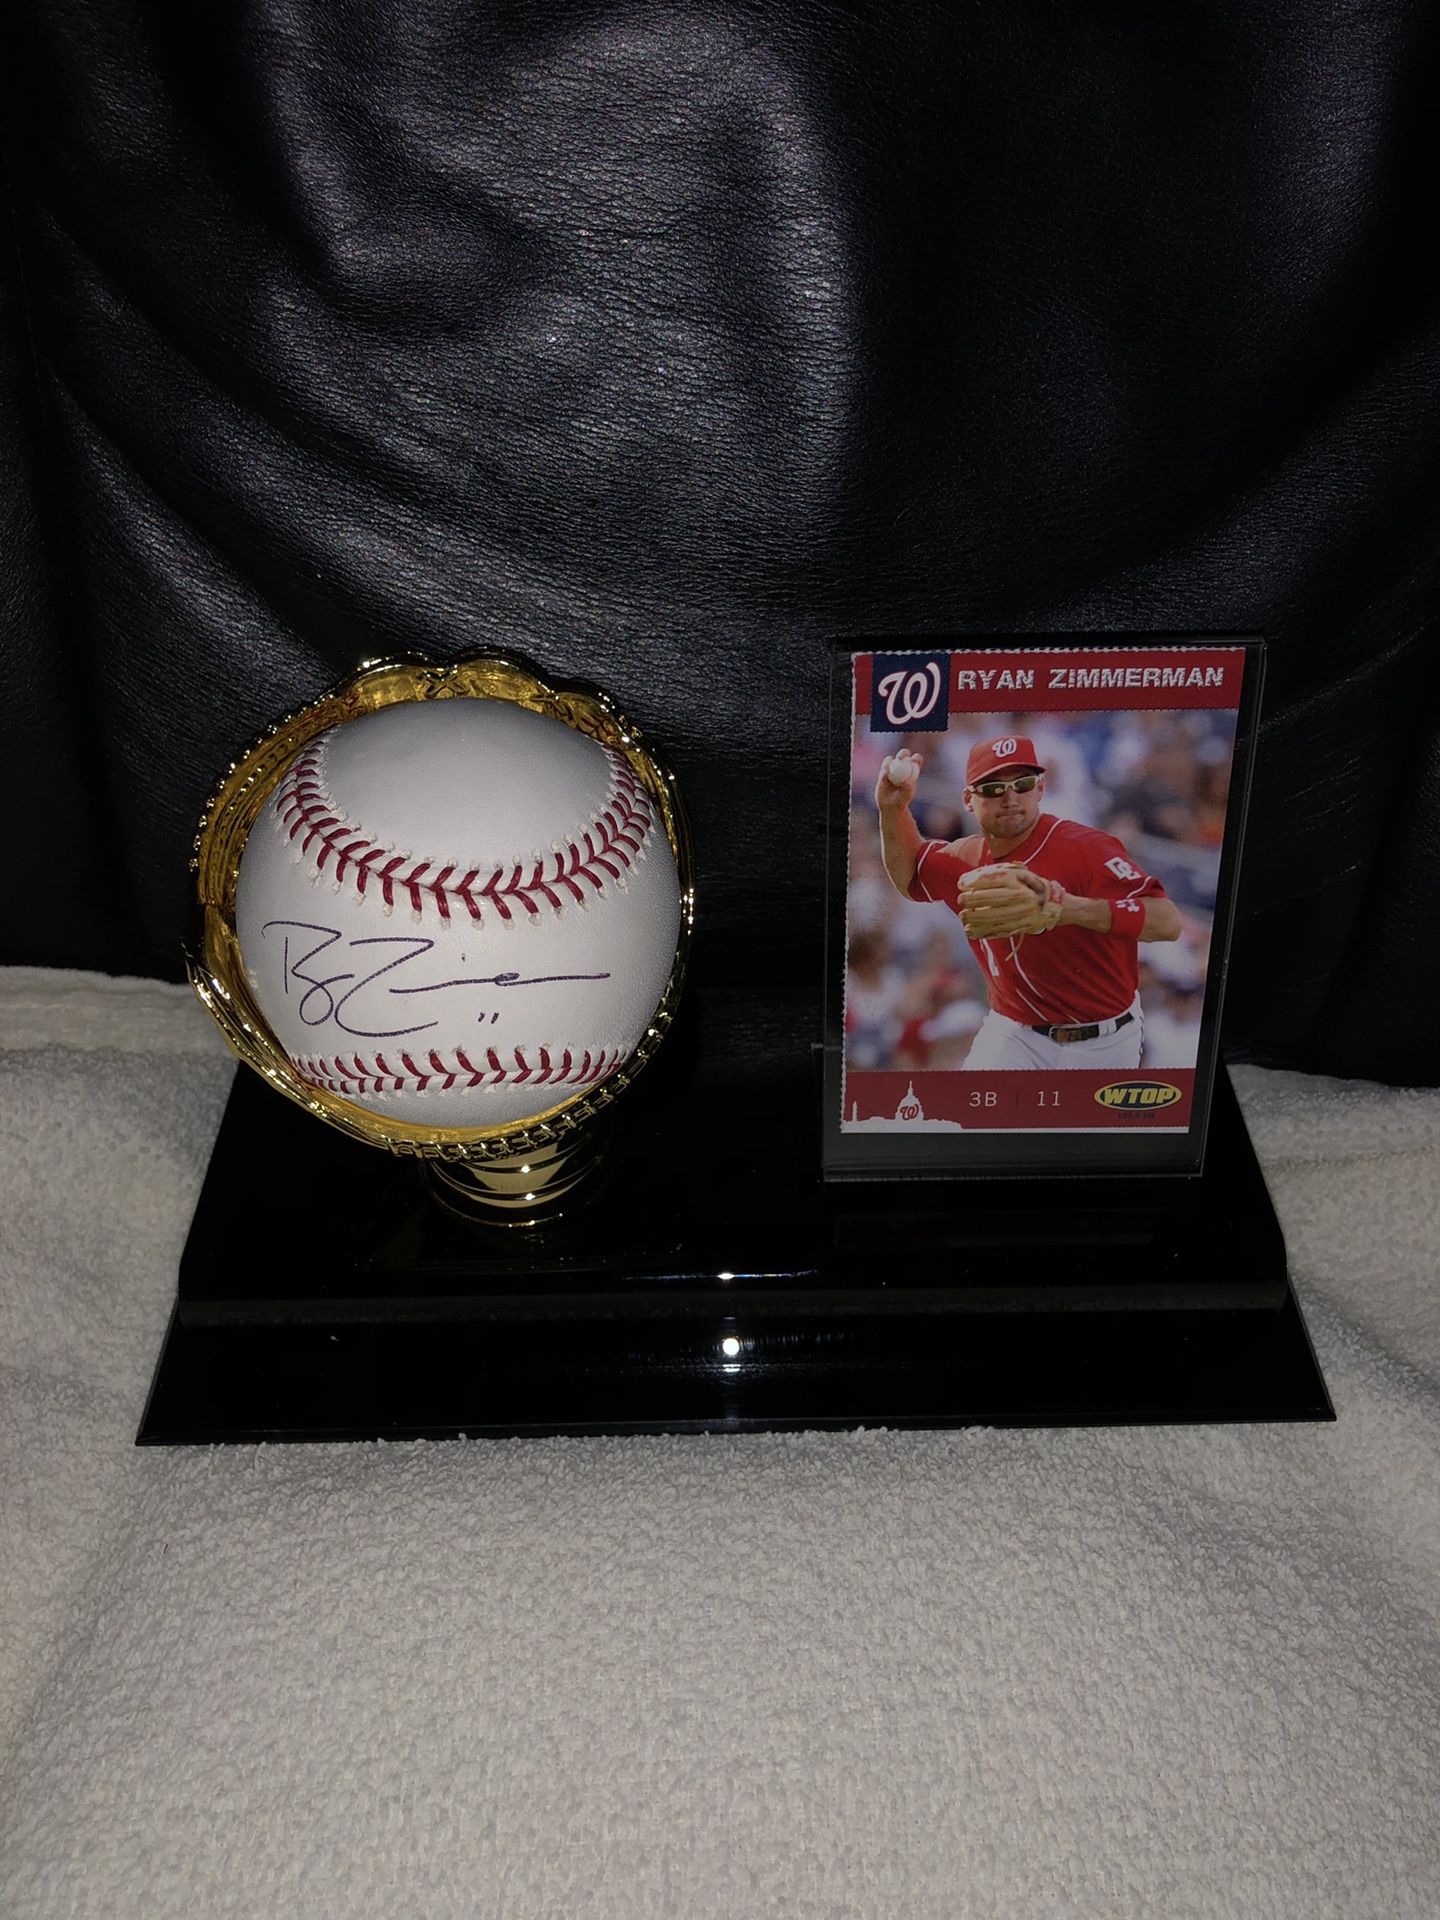 Autographed Ryan Zimmerman, Washington Nationals Baseball in Deluxe Gold Glove Holder! Excellent Autographed MLB Baseball -Mint, and unique promo bas